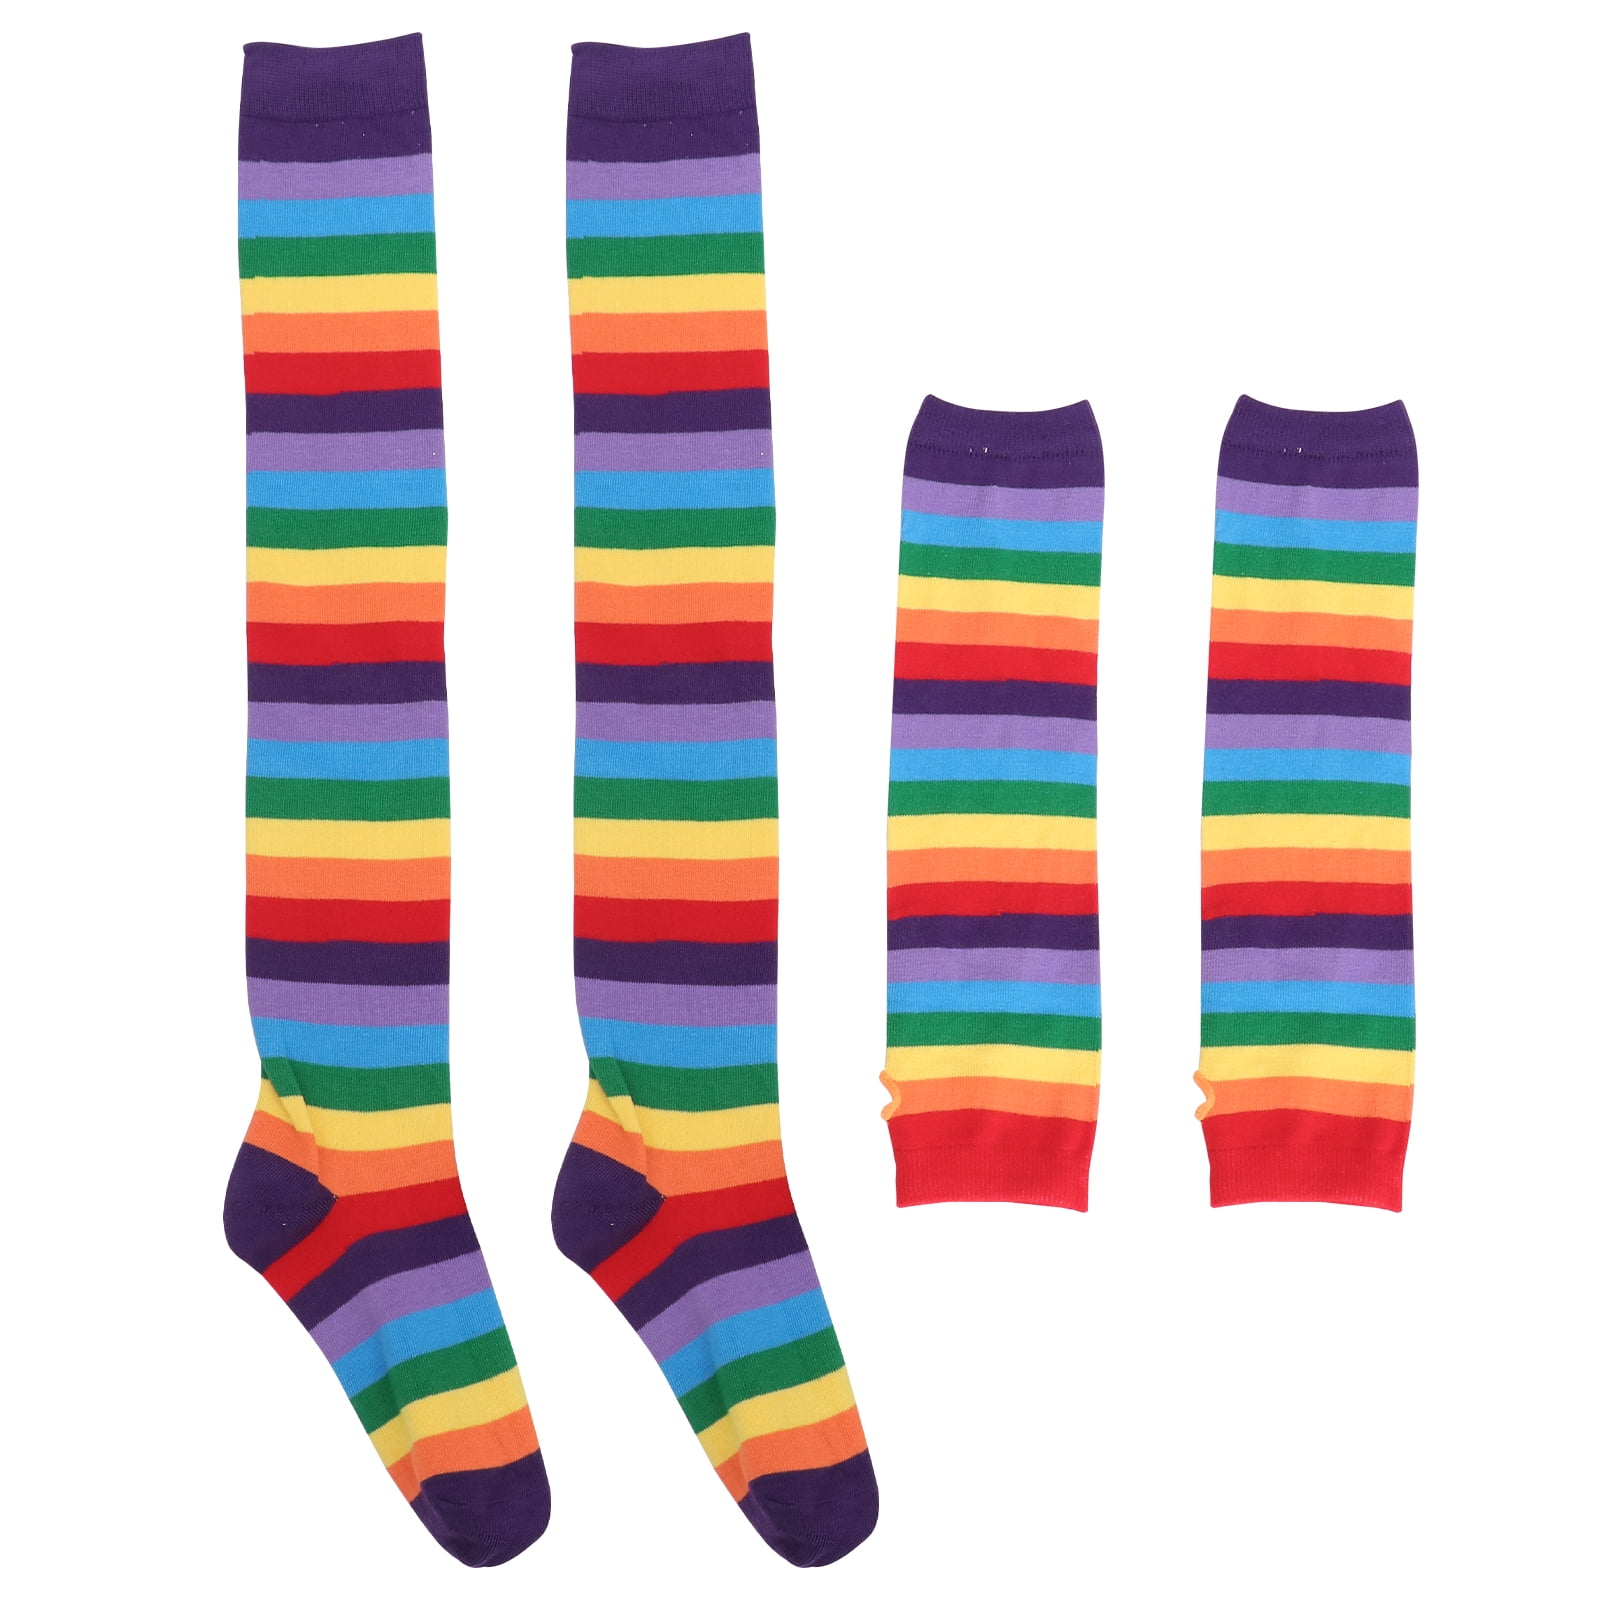 Girlslove talk Rainbow Thick Knee Arm Warmer Leg Stocking Colorful Thigh High Socks Party Striped Accessory Decoration Rainbow Color